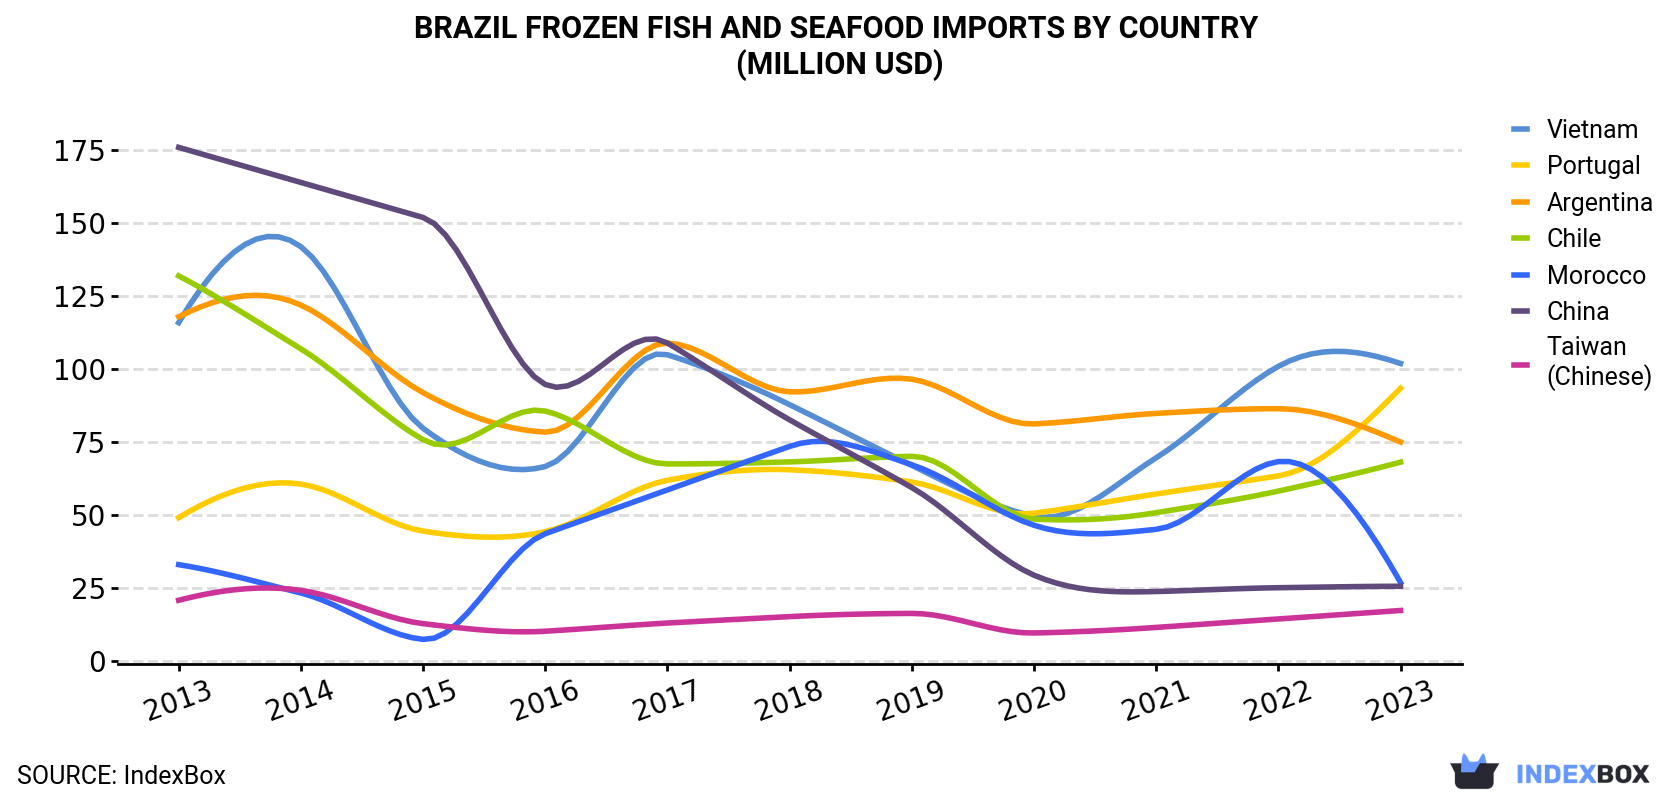 Brazil Frozen Fish and Seafood Imports By Country (Million USD)